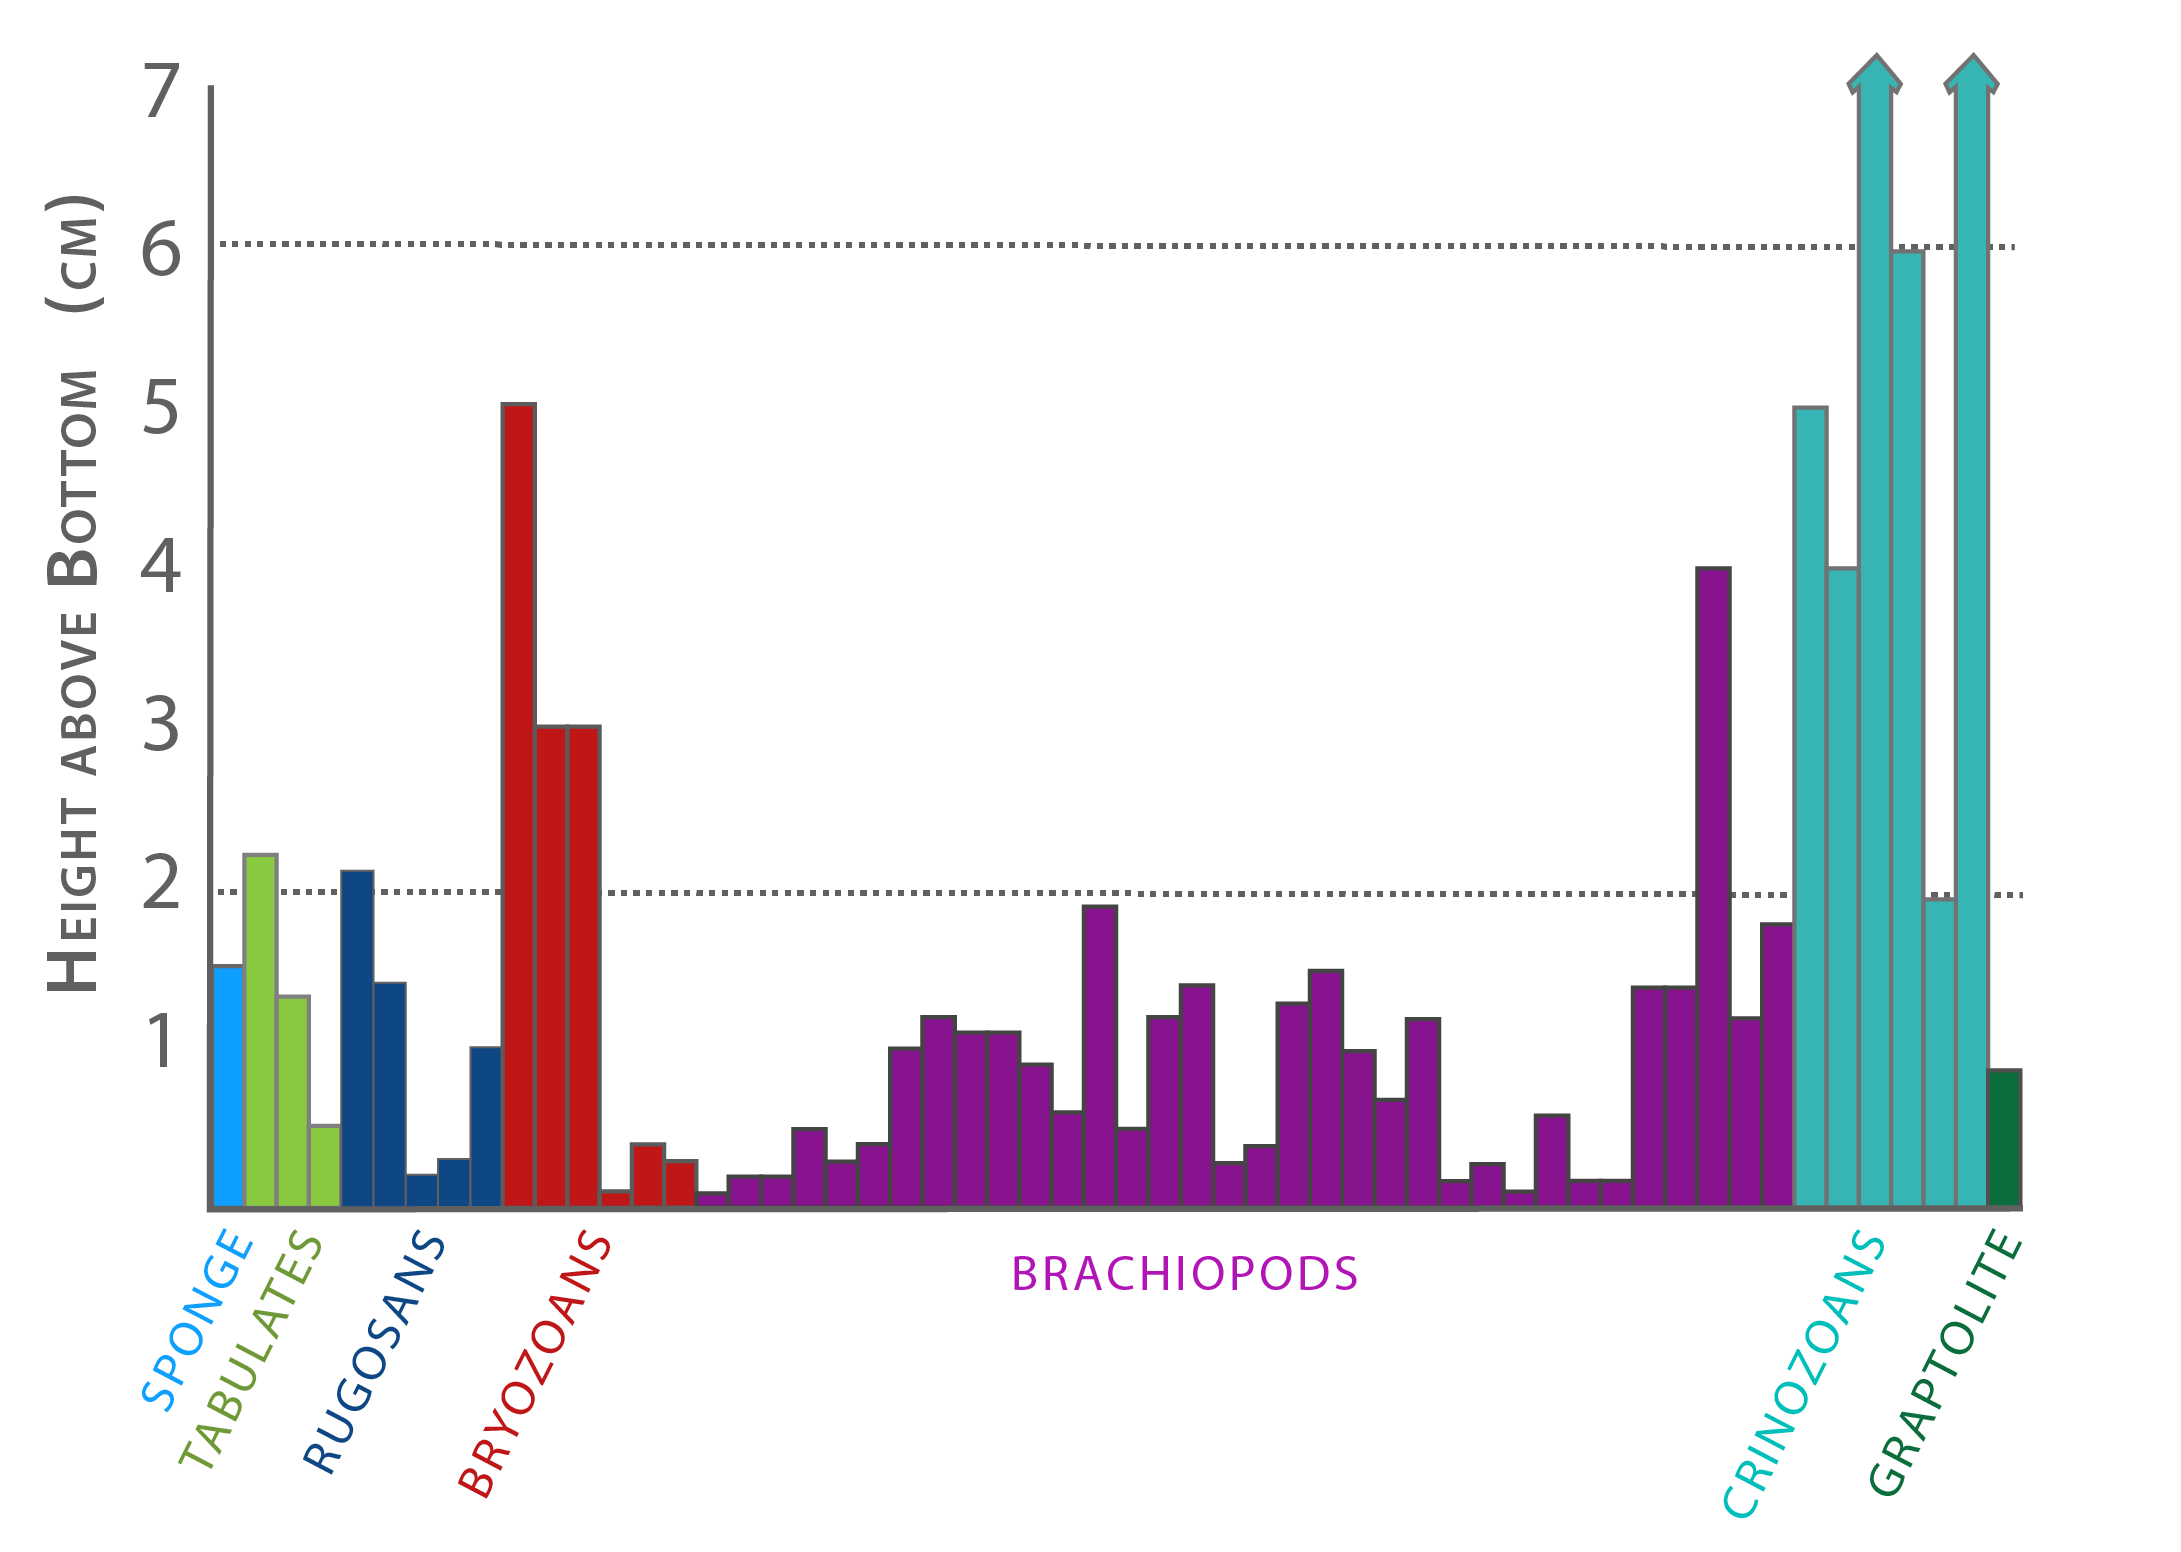 Bar chart illustrating heights of different types of Silurian reef organisms.